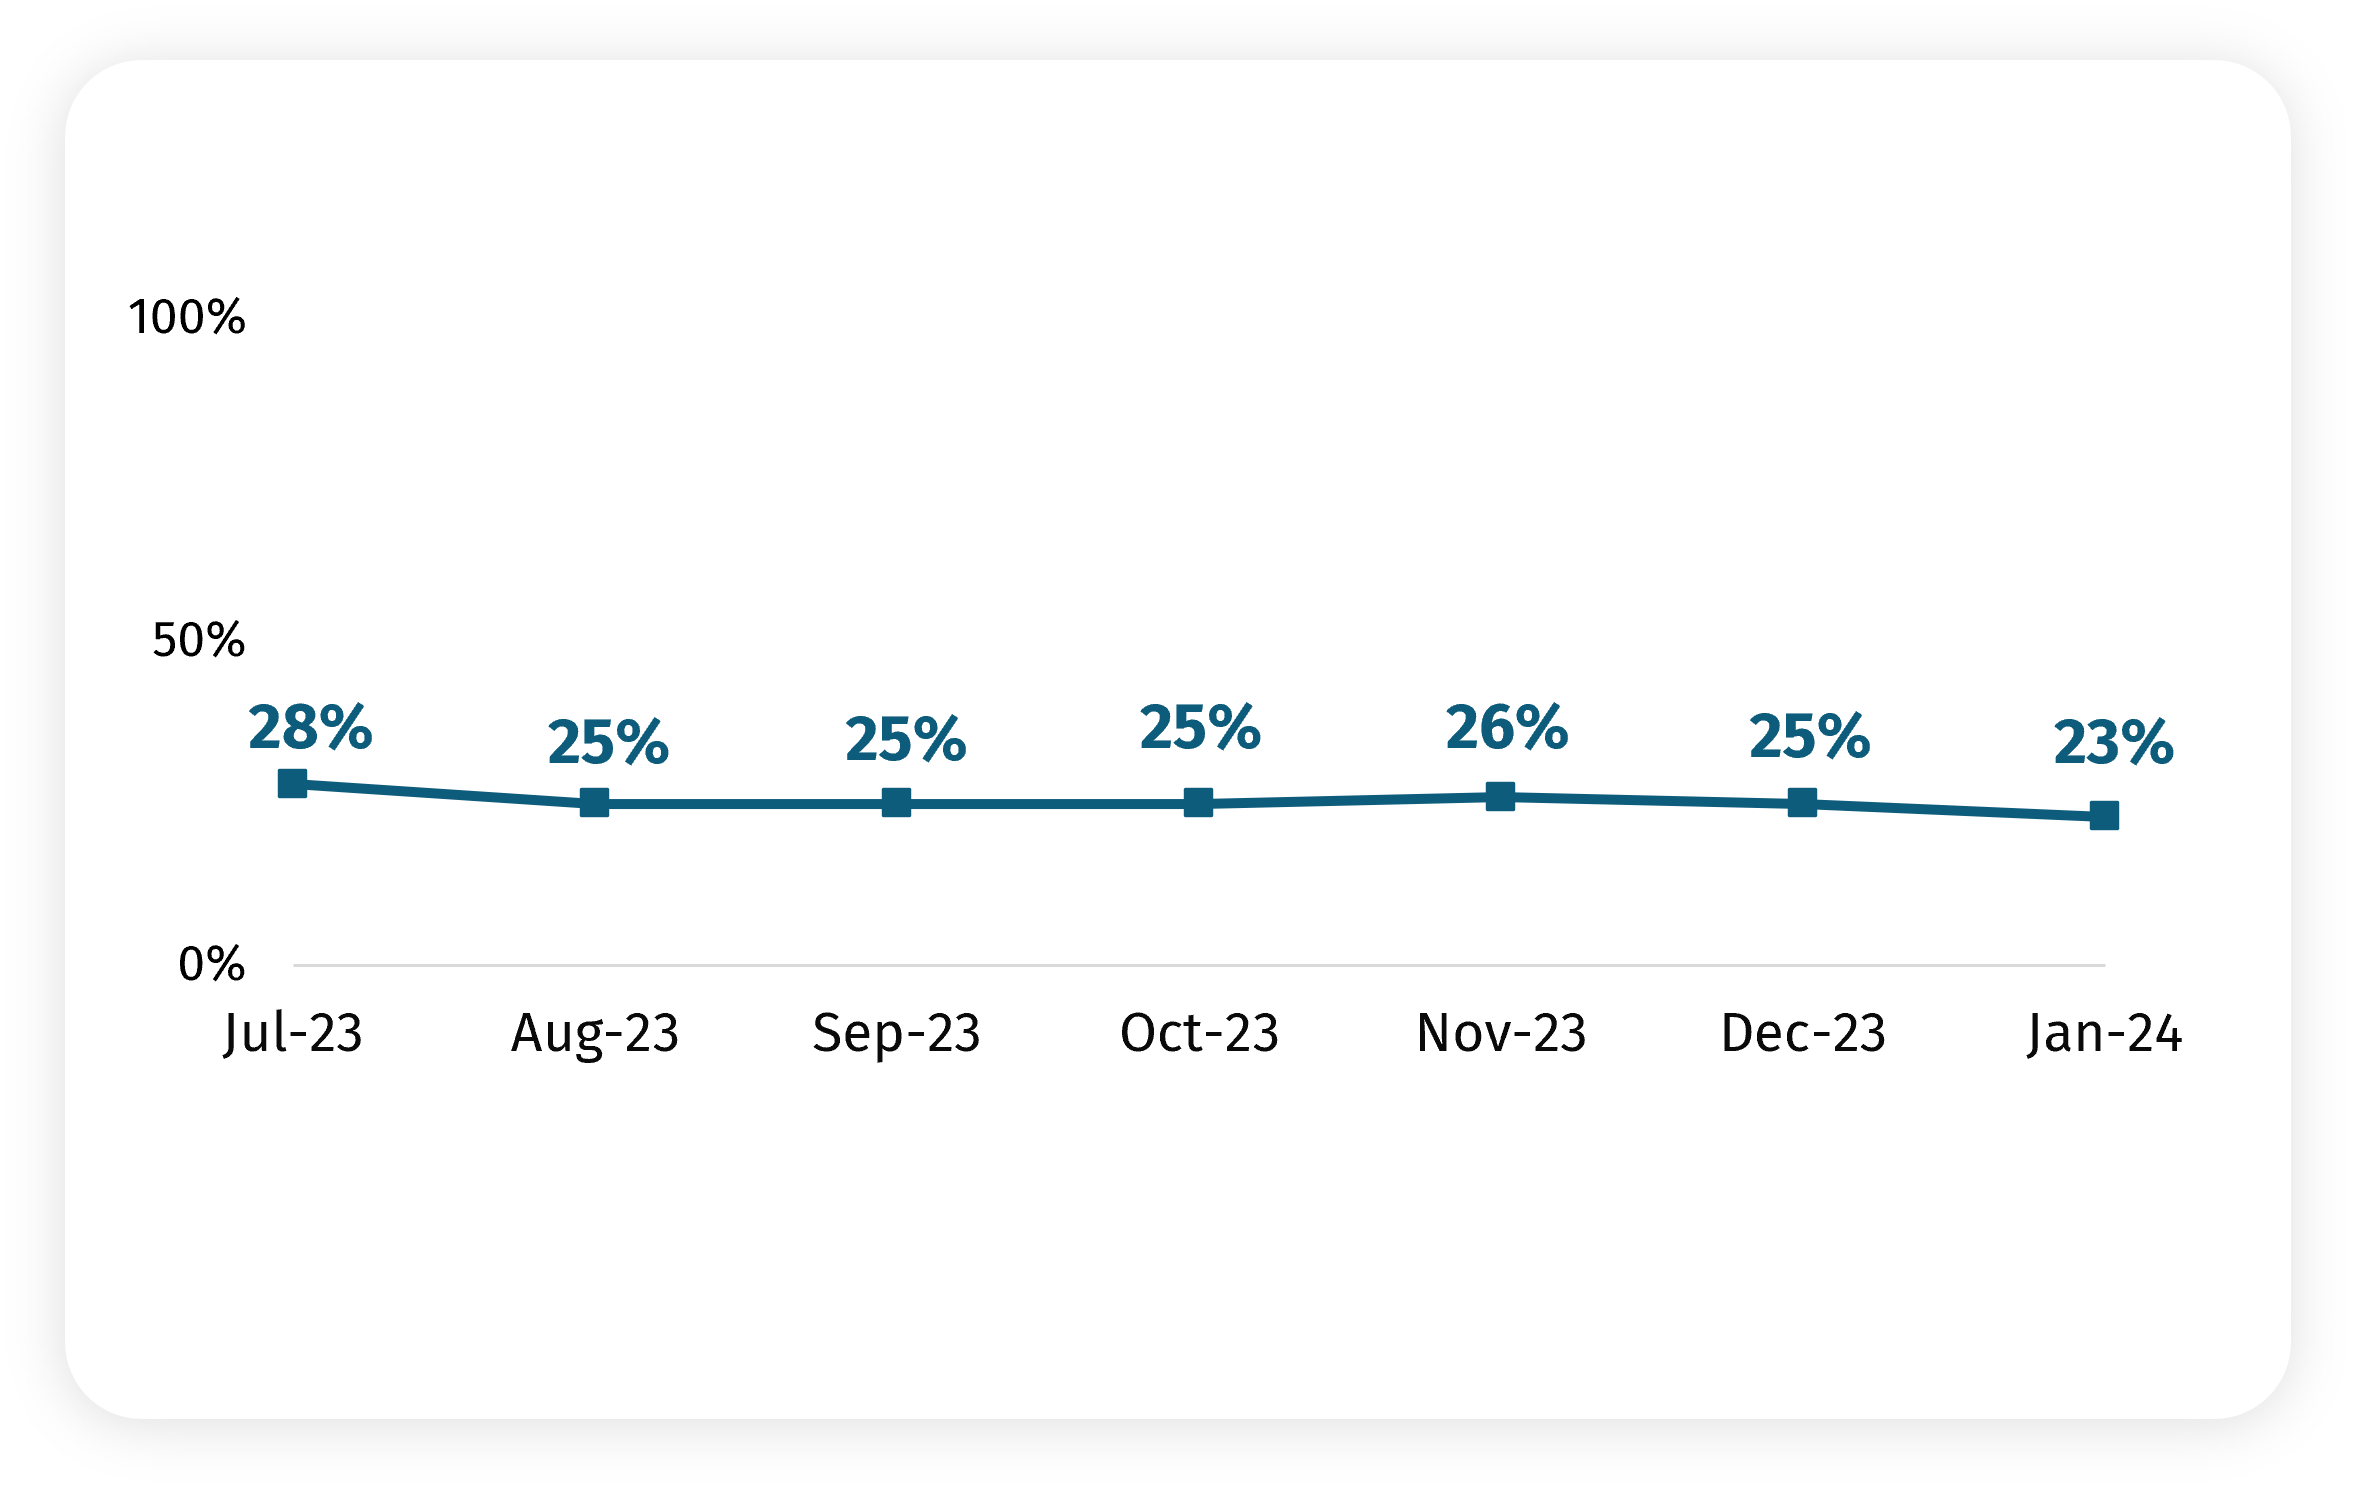 Line graph shows proportion worried about their household not being able to afford food for July (28%), August (25%), September (25%), October (25%),  November (26%), December (25%) and January (23%).